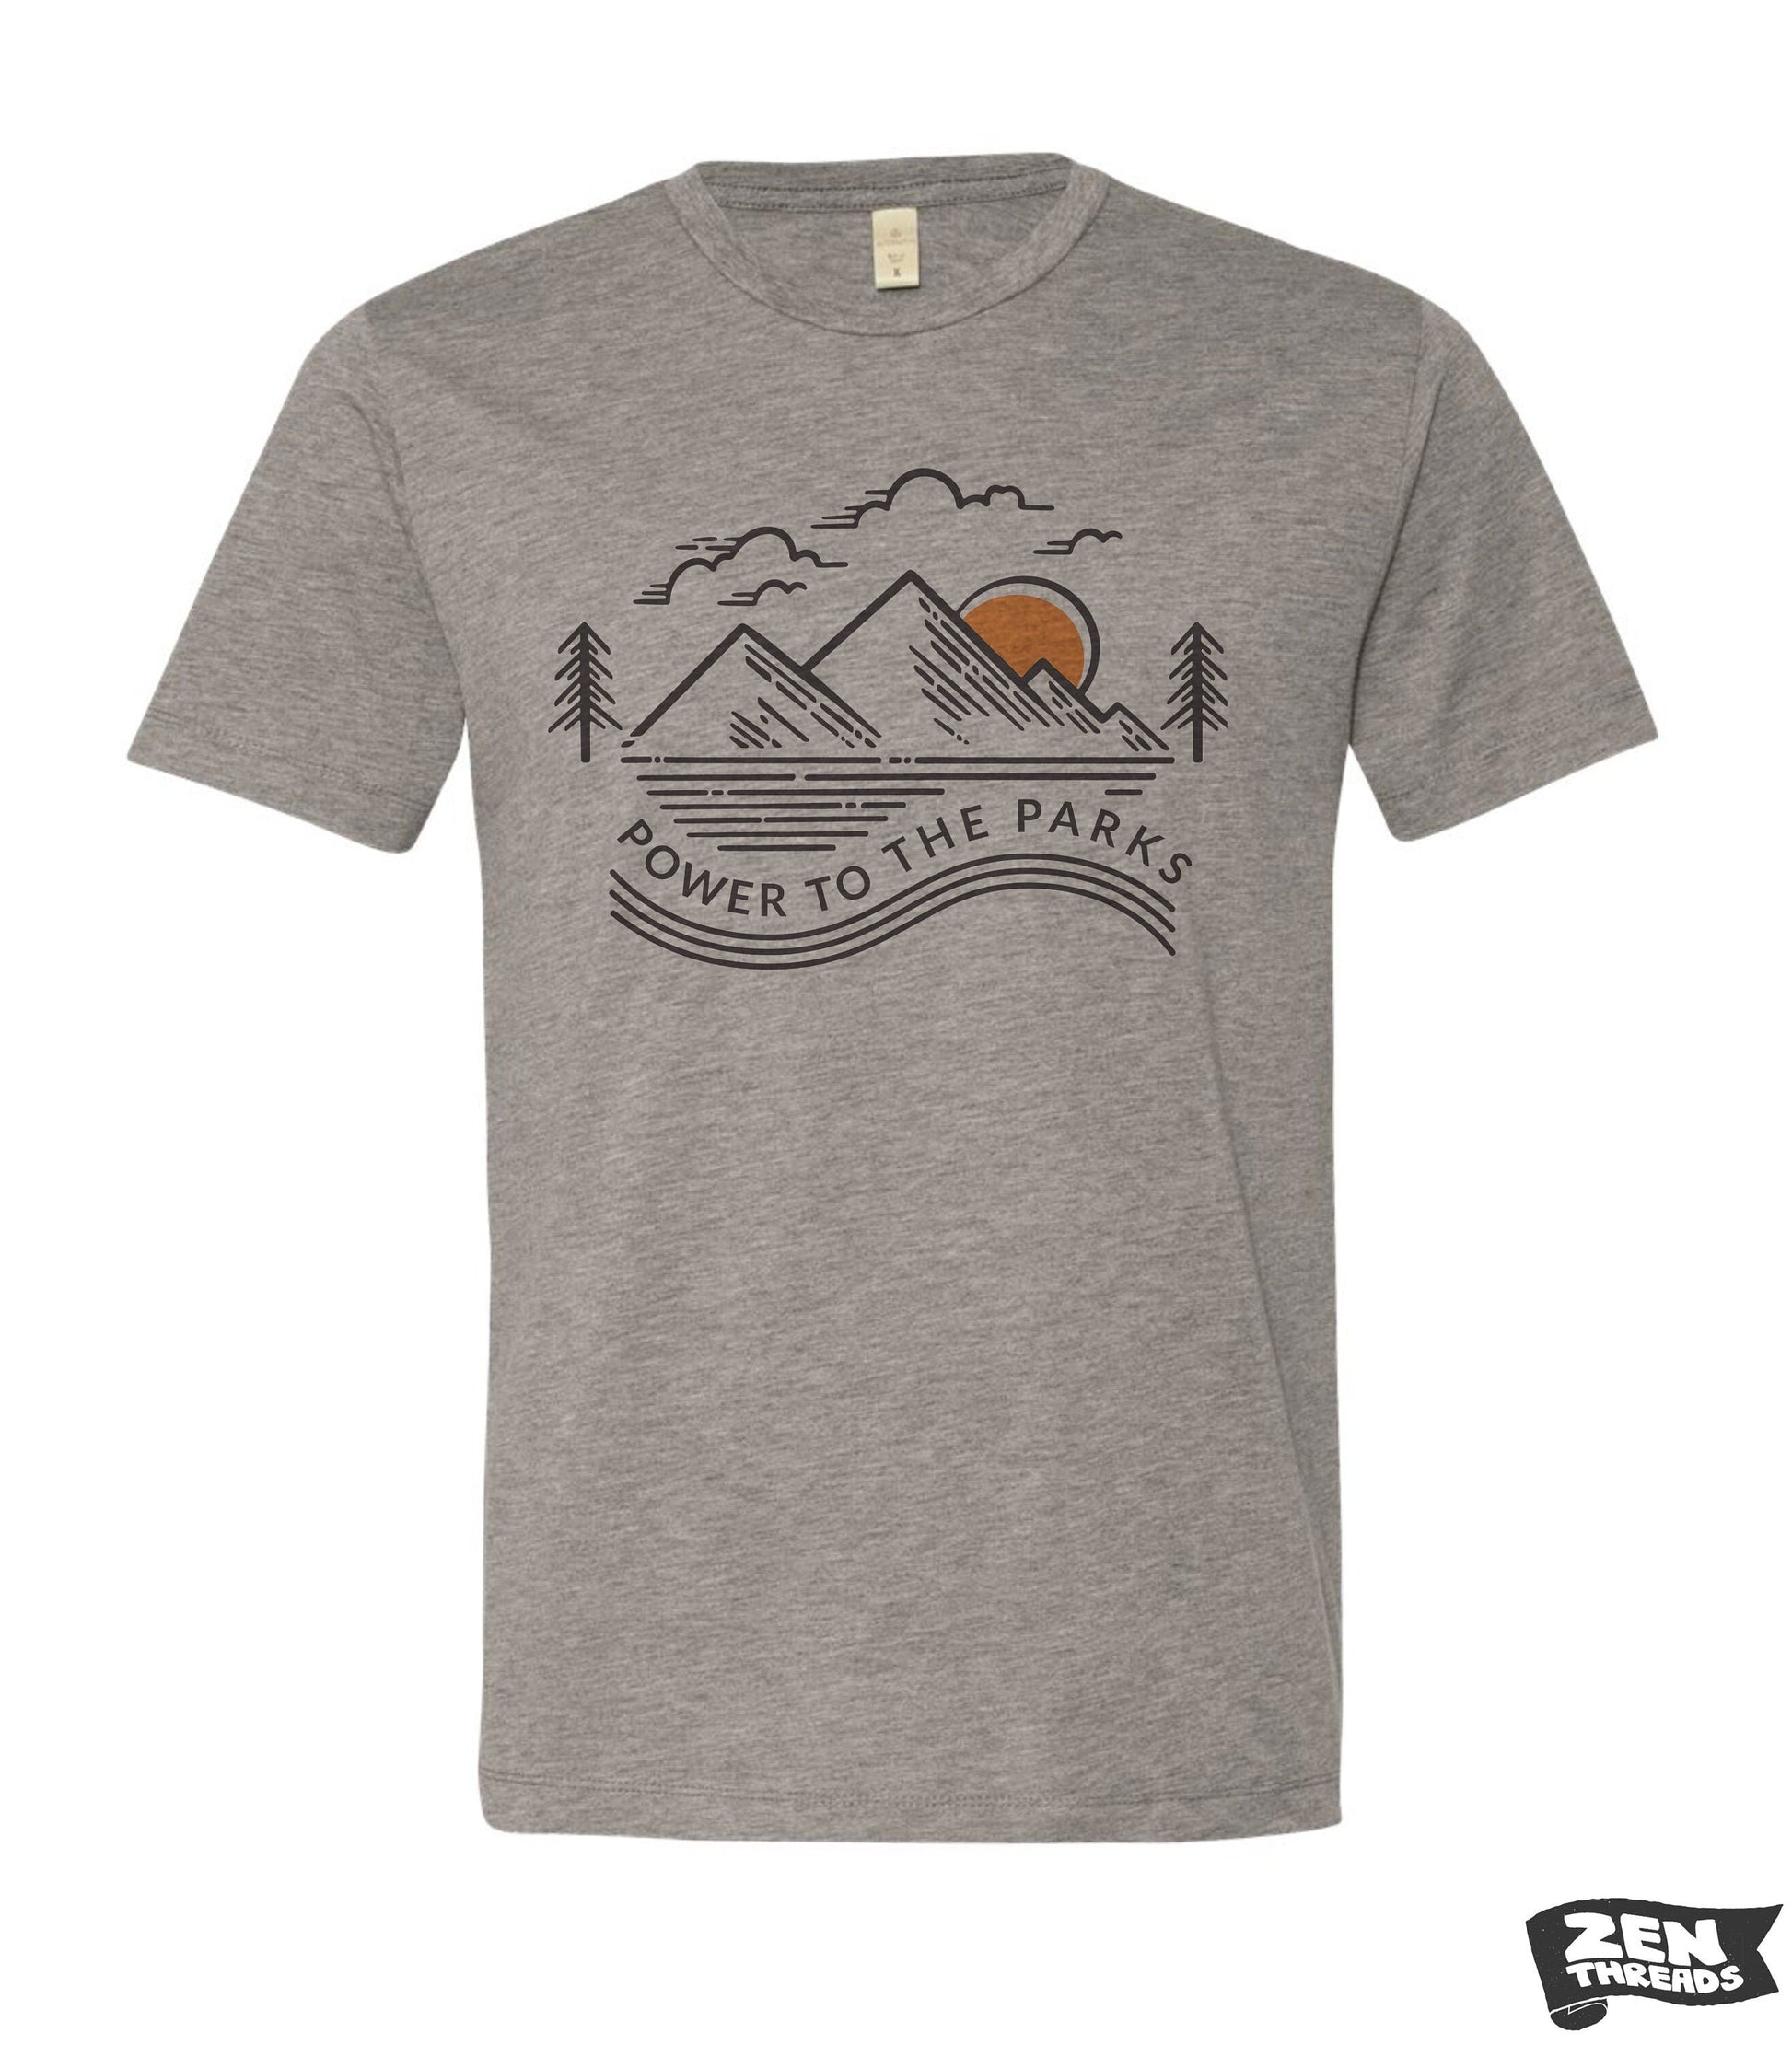 Power To The PARKS Unisex Bella Canvas t shirt printed custom tee Zen Threads national parks city town state pride hiking camping adventure